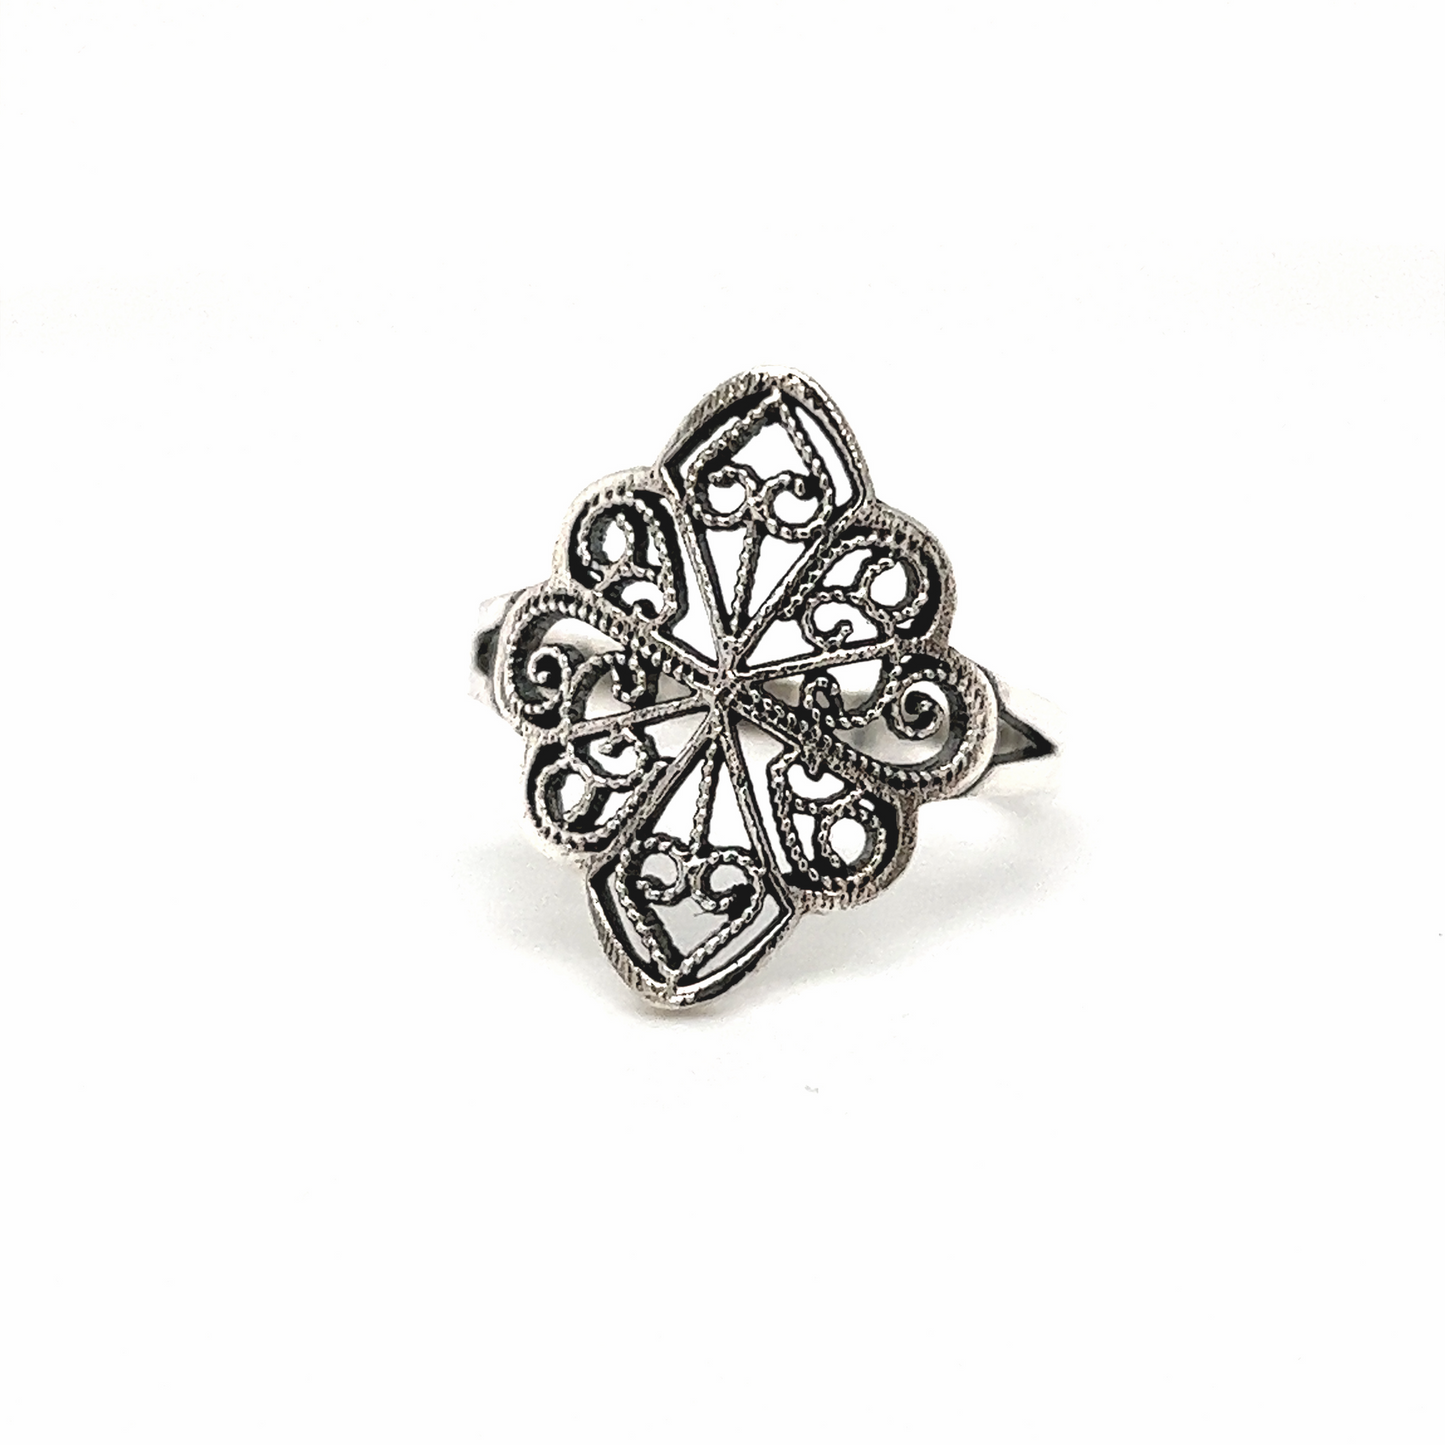 A Super Silver vintage style Silver Filigree Shield Ring with an intricate Art Nouveau design.